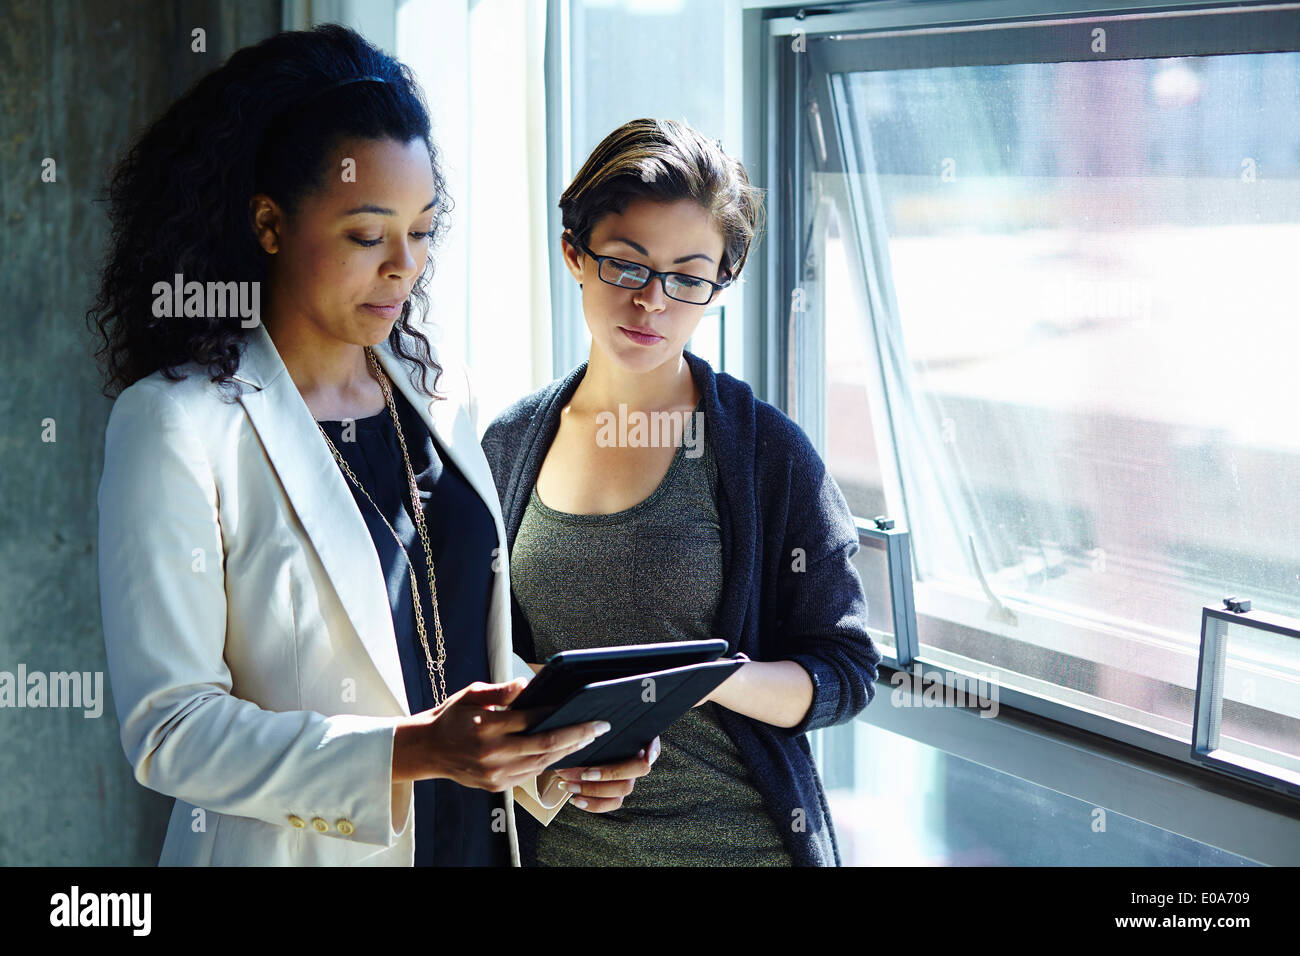 Two businesswomen looking at digital tablet in office Banque D'Images